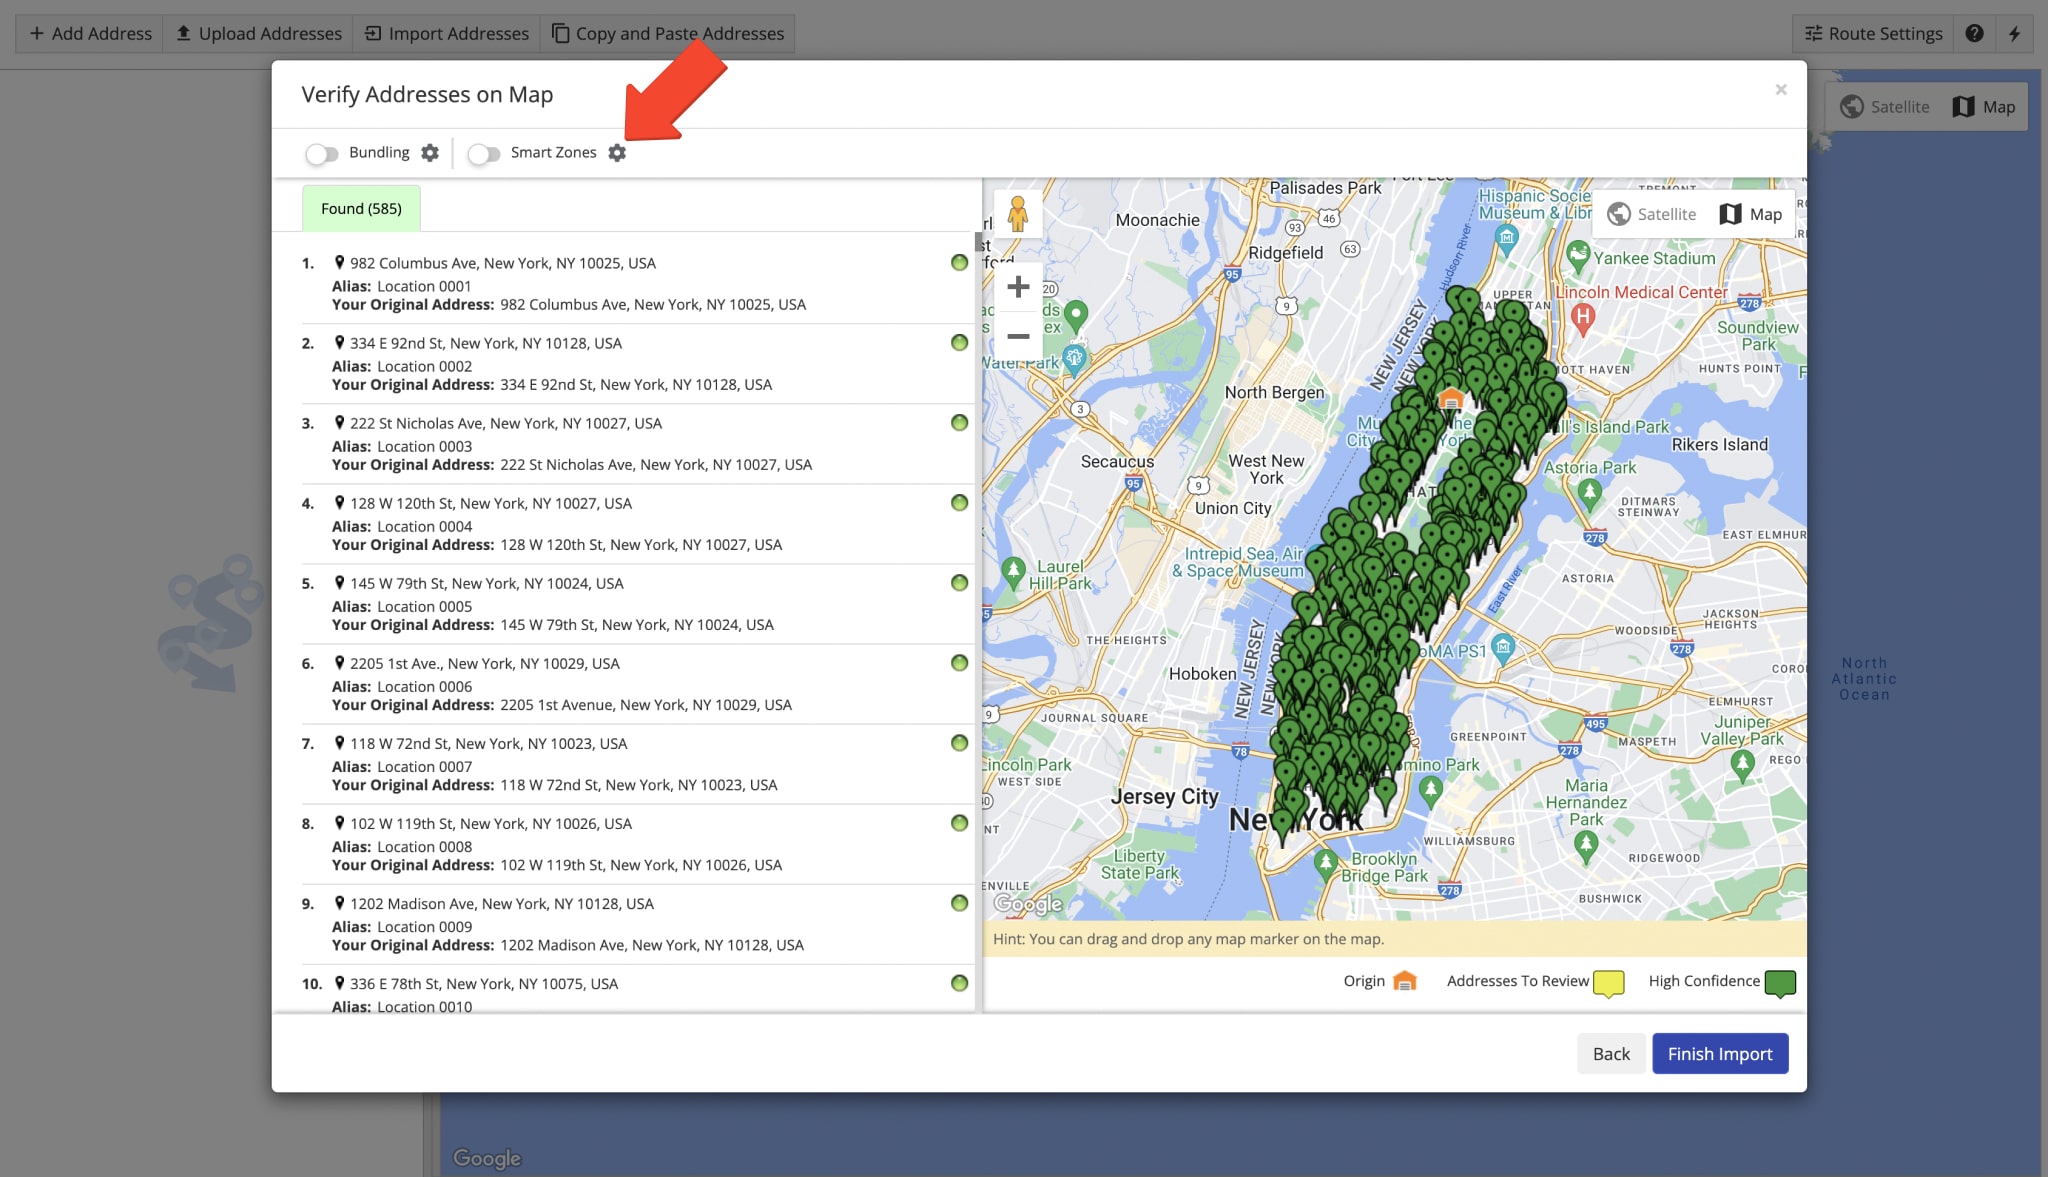 Enable Smart Zone route planning when verifying geocoded addresses on the map.